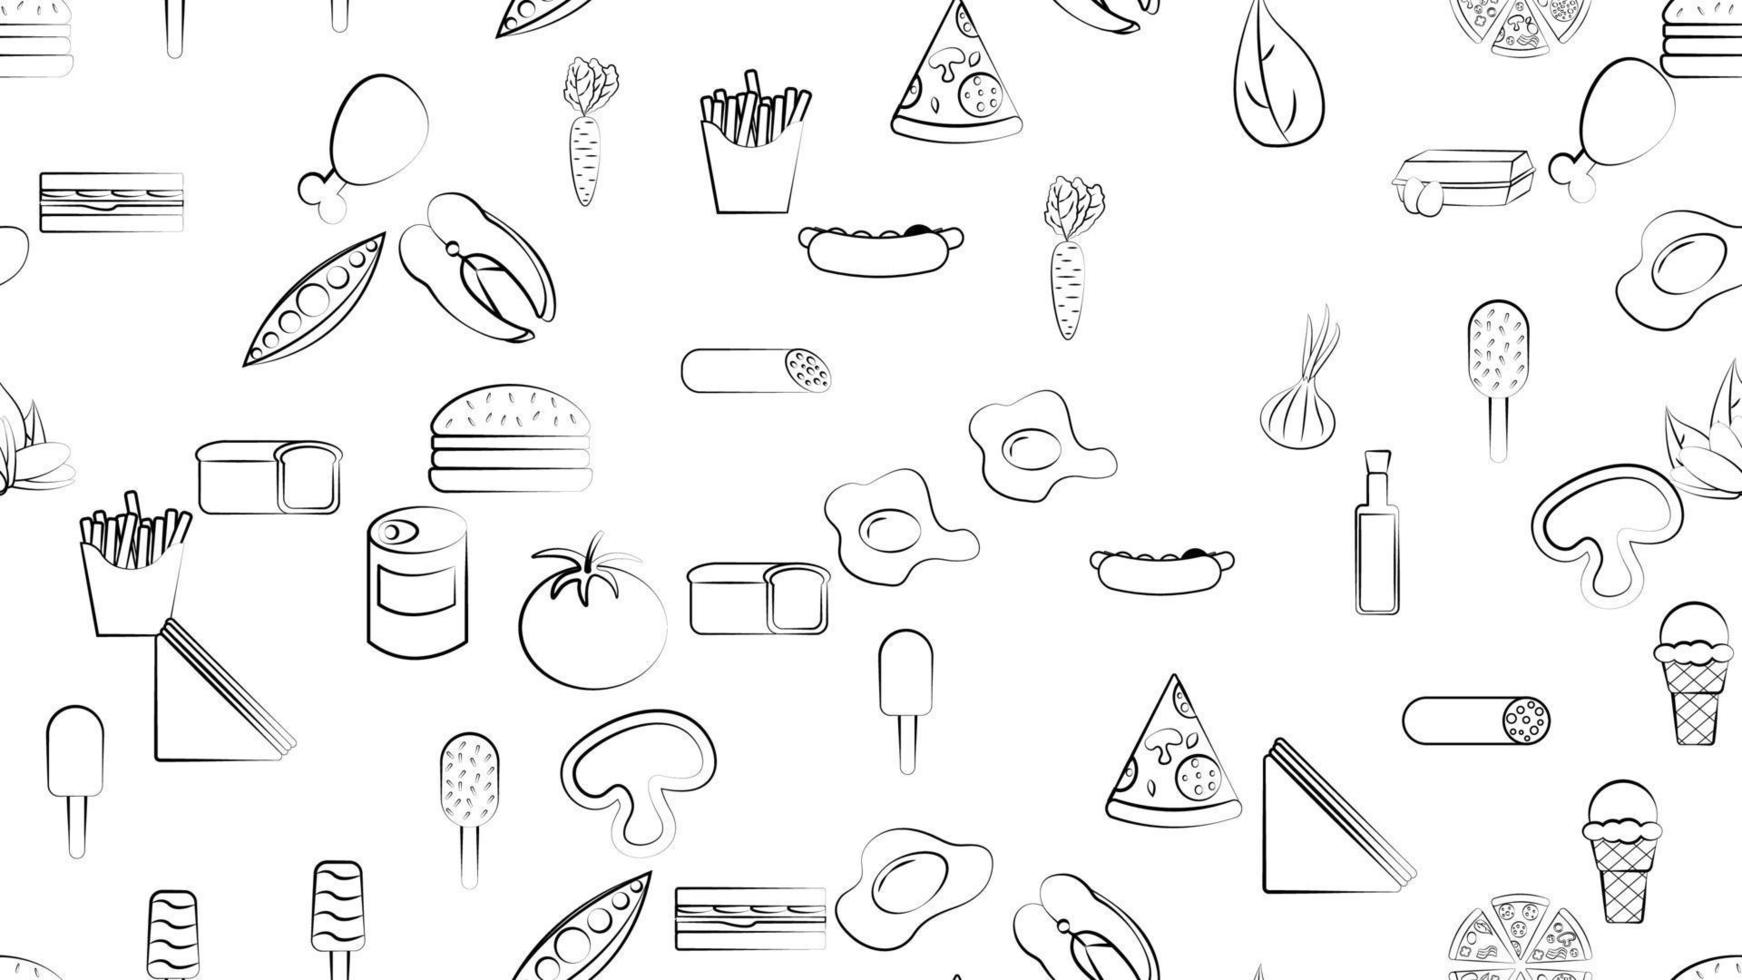 Black and white endless seamless pattern of food and snack items icons set for restaurant bar cafe hot dog, ice cream, greens, chicken, fries, eggs, pizza, fish, canned food, eggs. The background vector